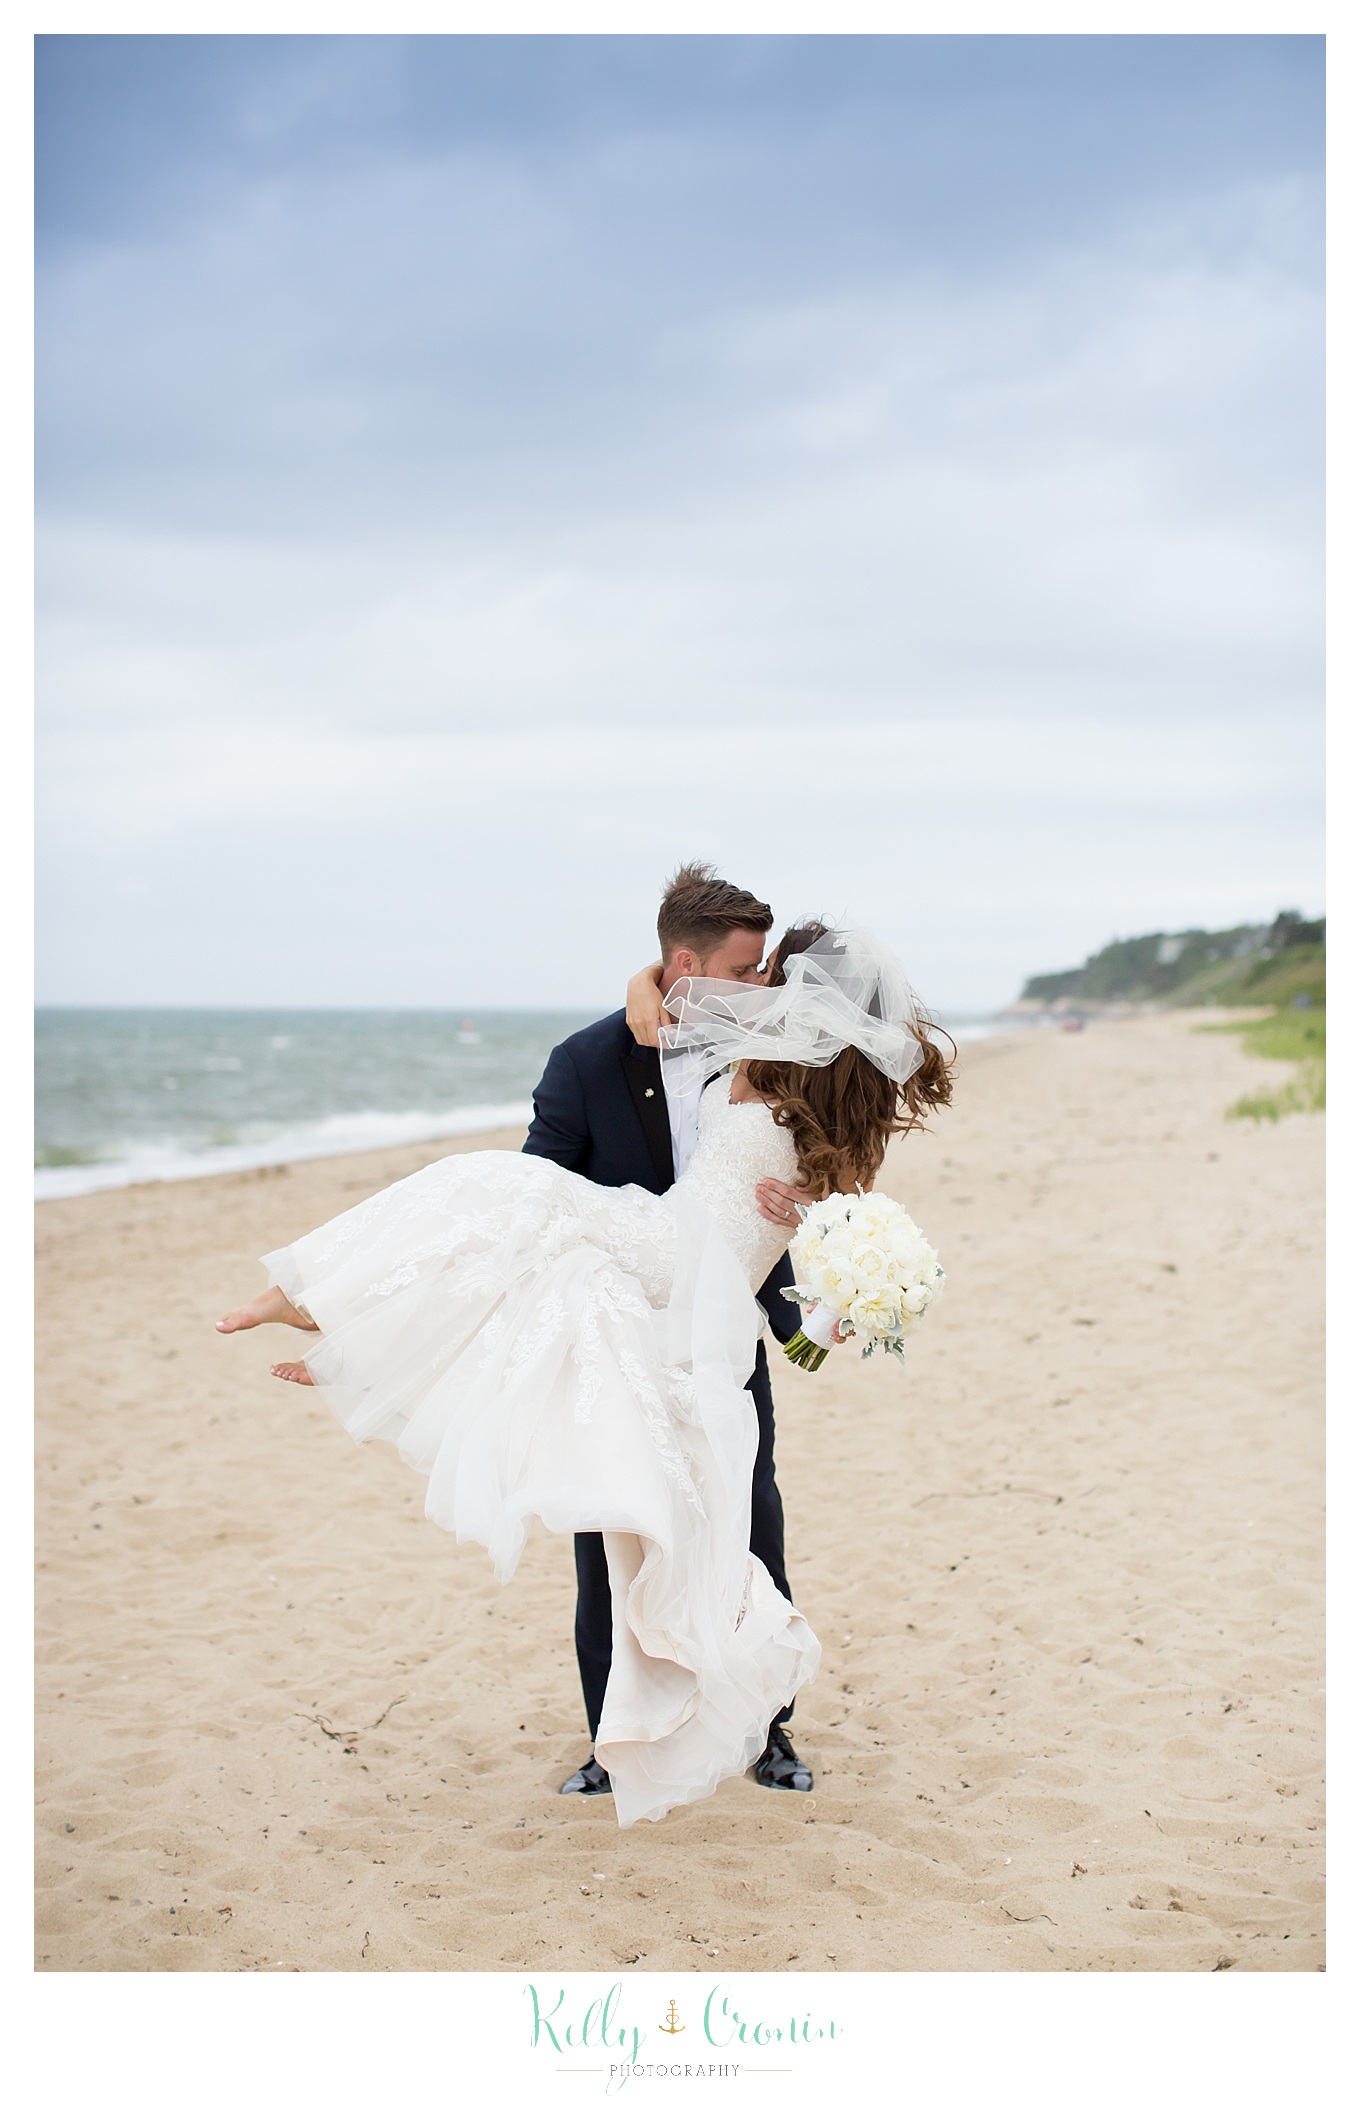 A man carries his new wife | Kelly Cronin Photography | Cape Cod love story